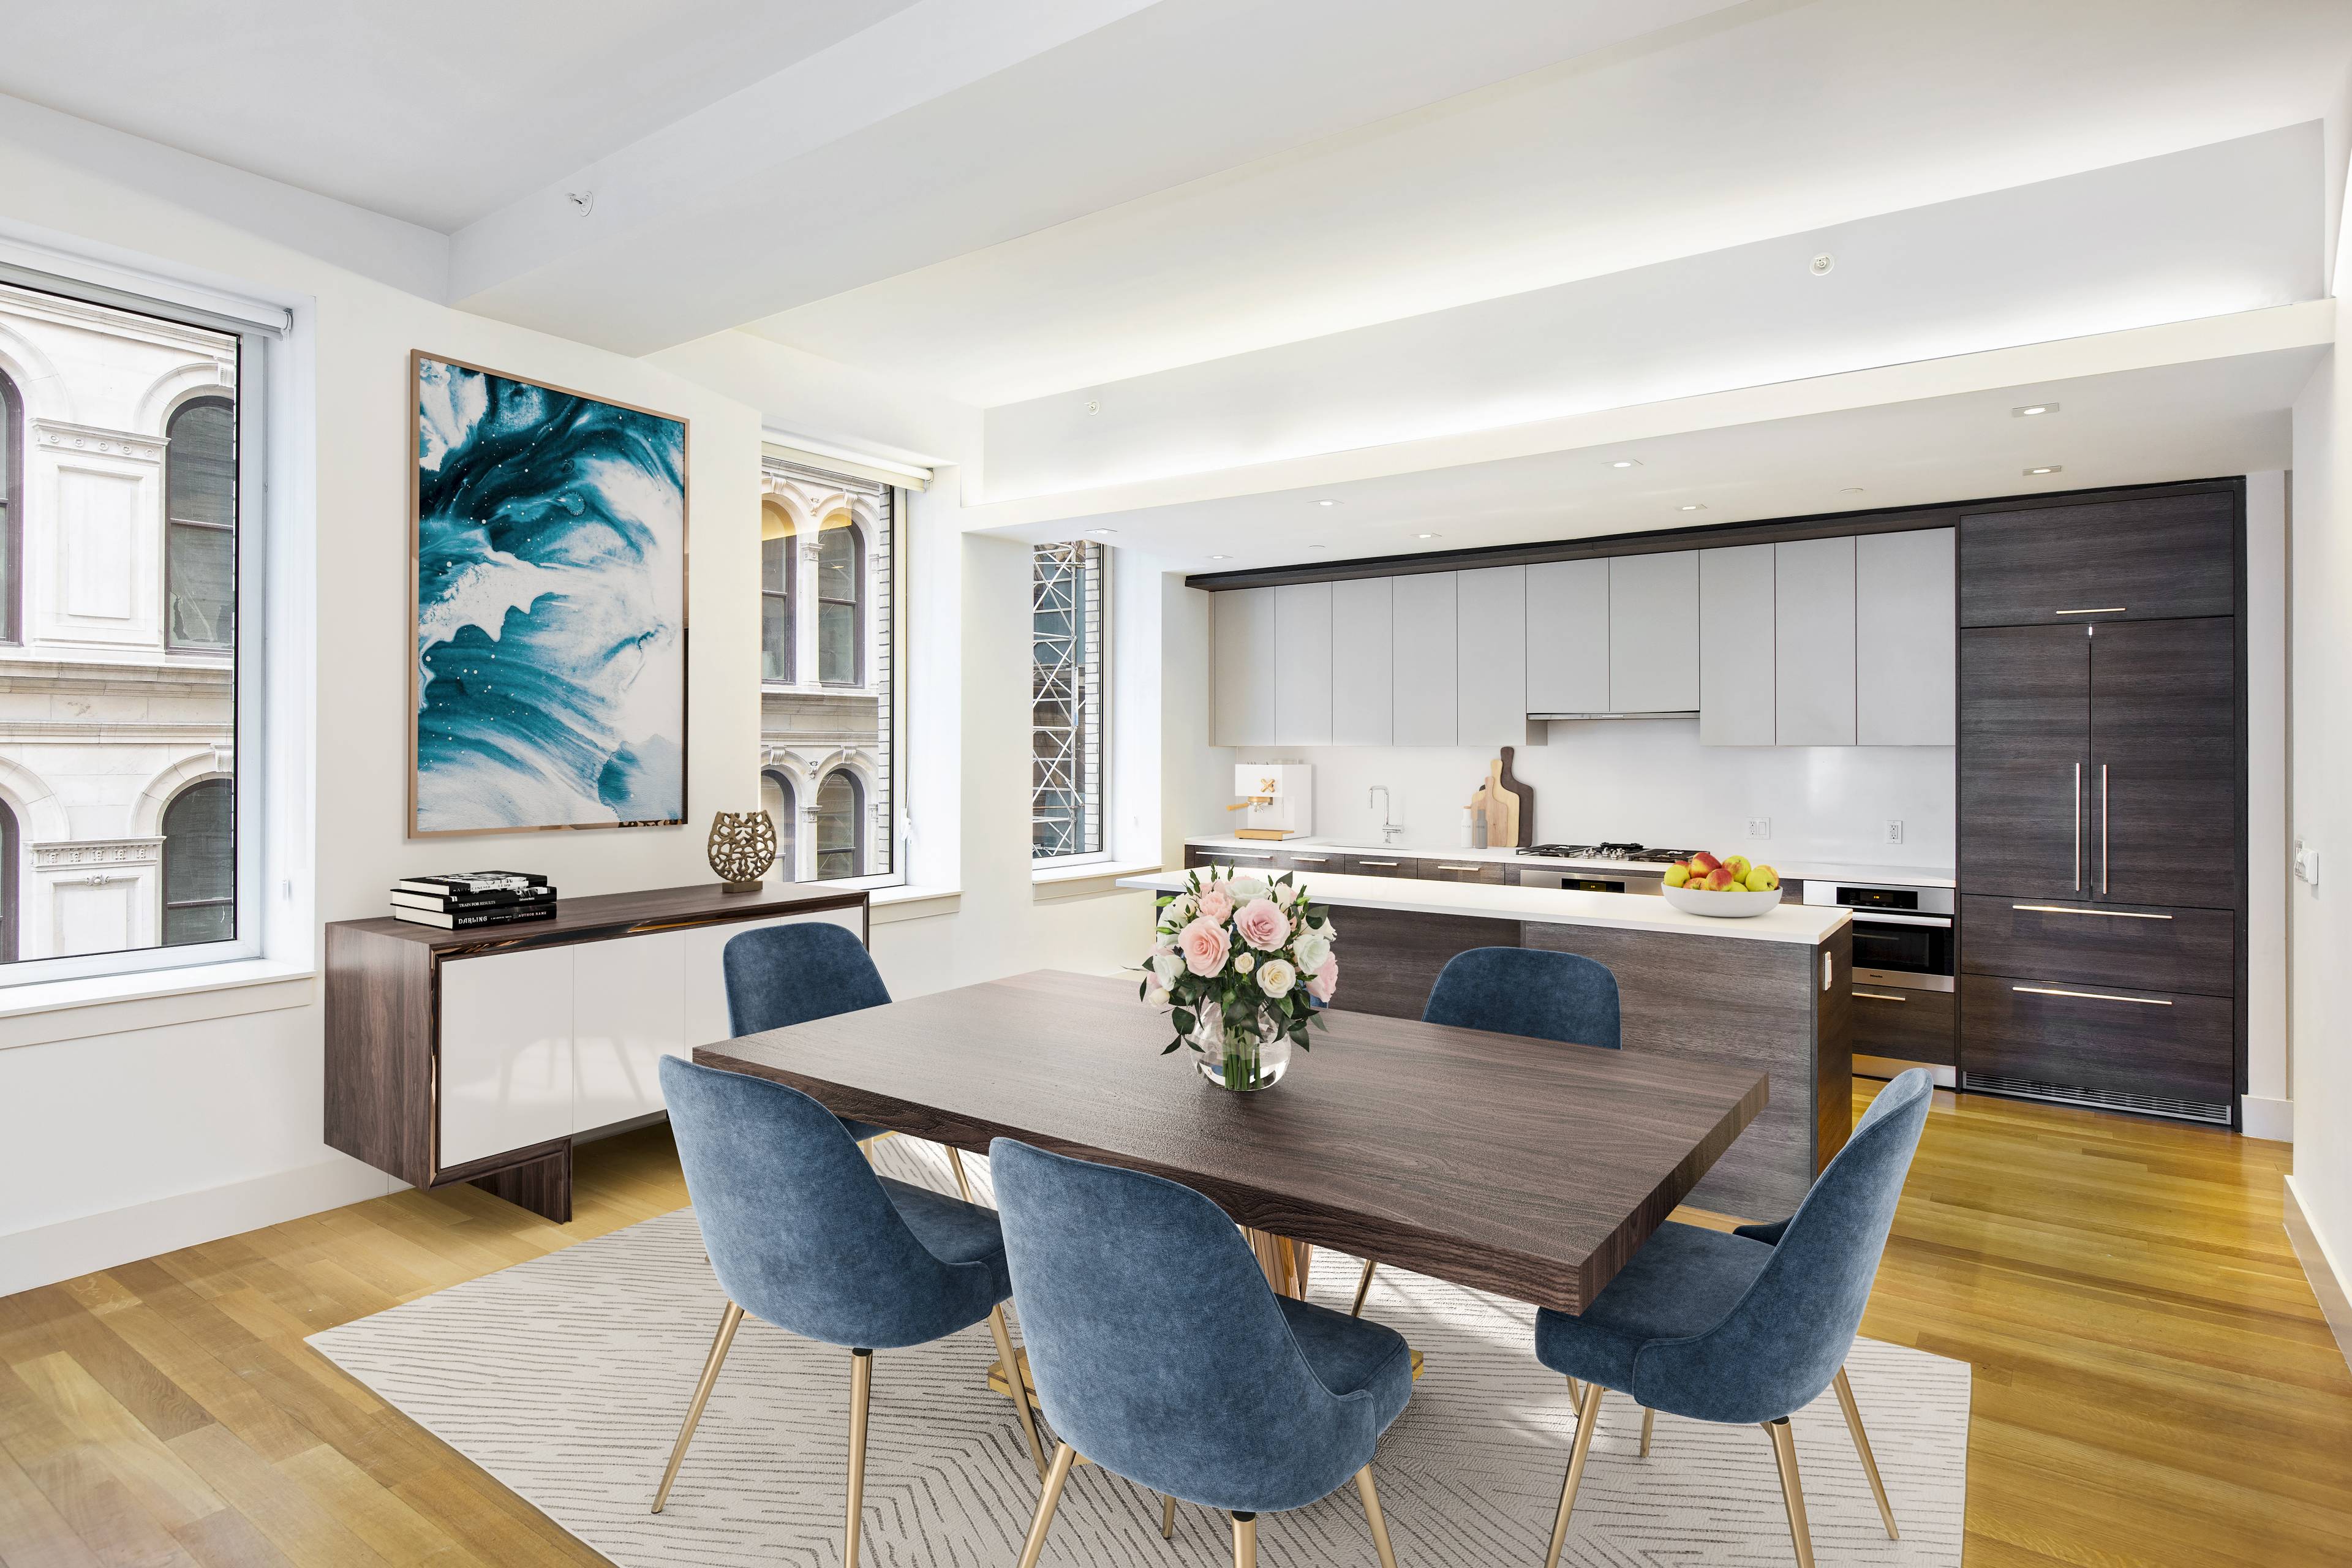 Gorgeous 3 bedroom 3 bathroom apartment in Tribeca, in a stunning prewar building that was reinvented in 2014 as an ultra luxury condominium by famed Italian developers Bizzi and Partners.